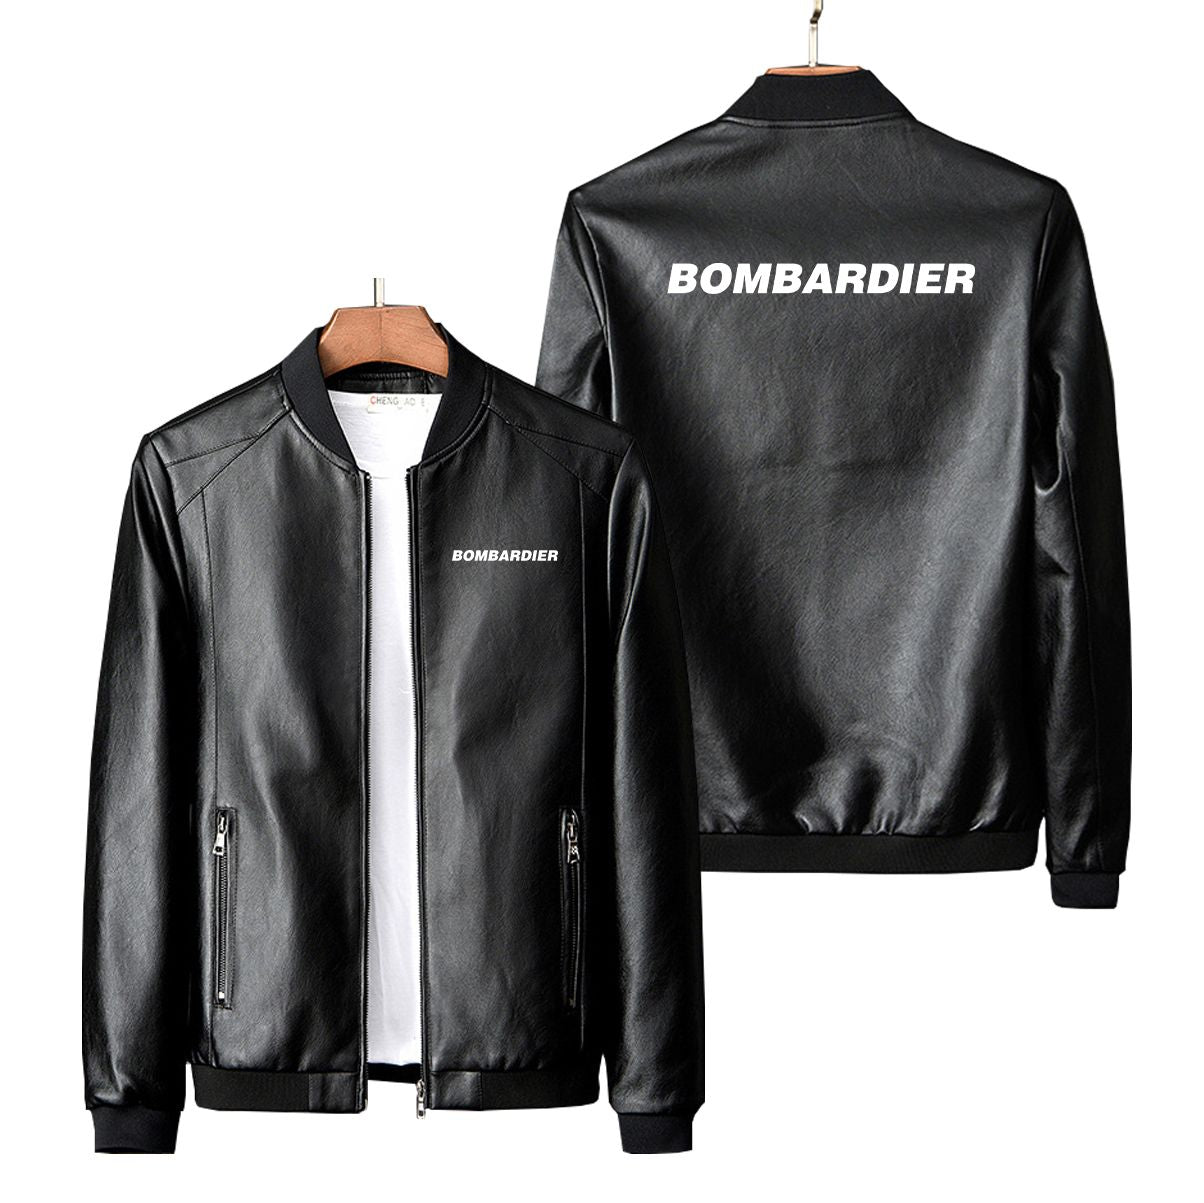 Bombardier & Text Designed PU Leather Jackets